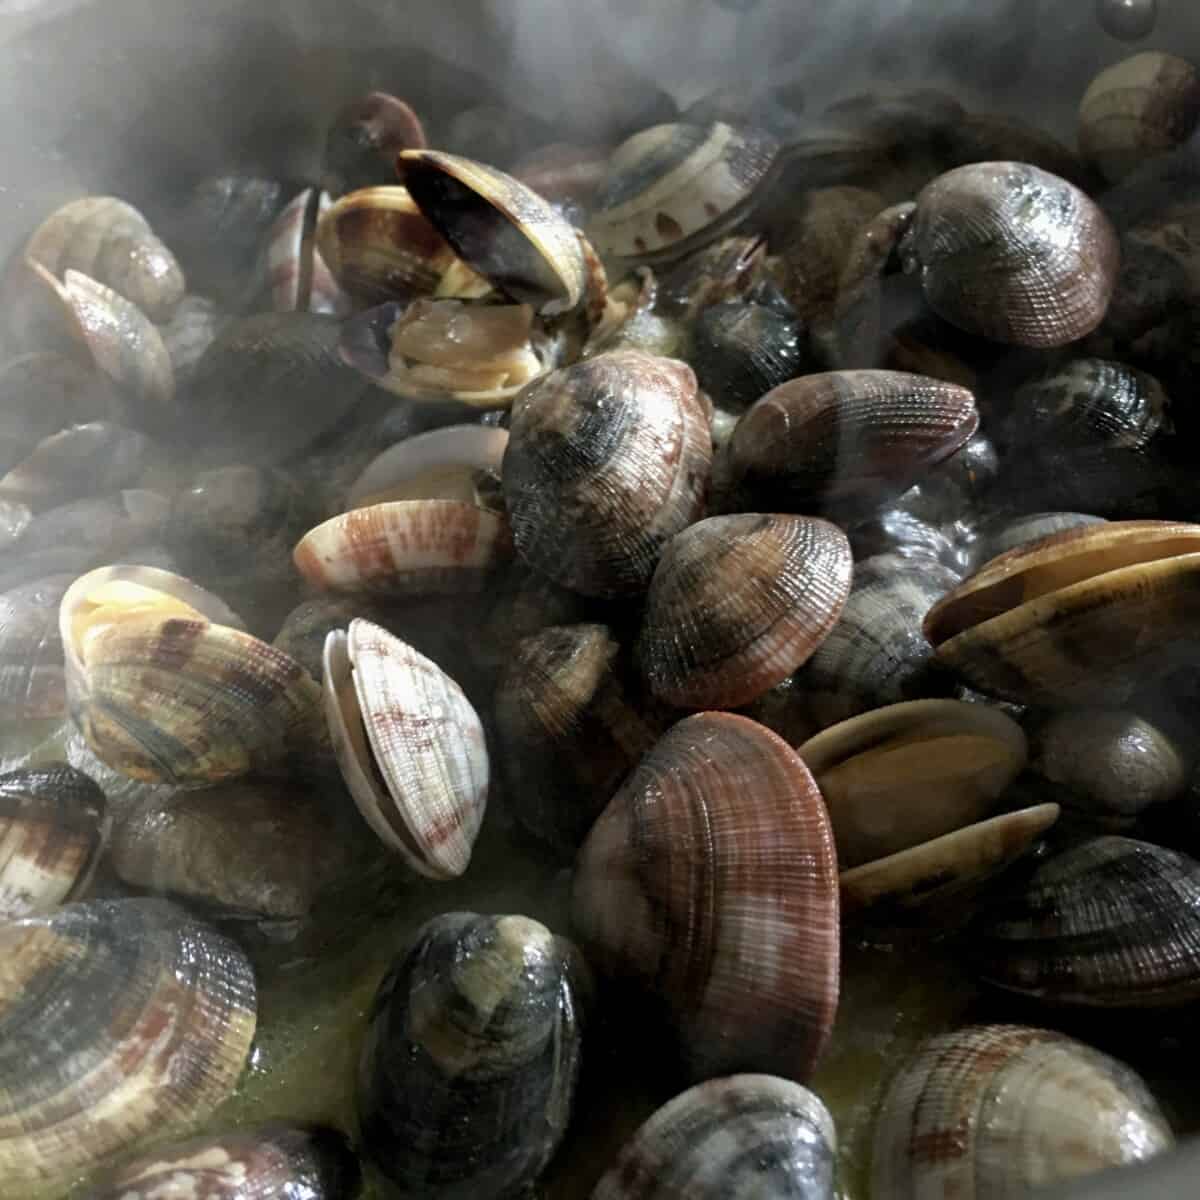 clams just beginning to steam open